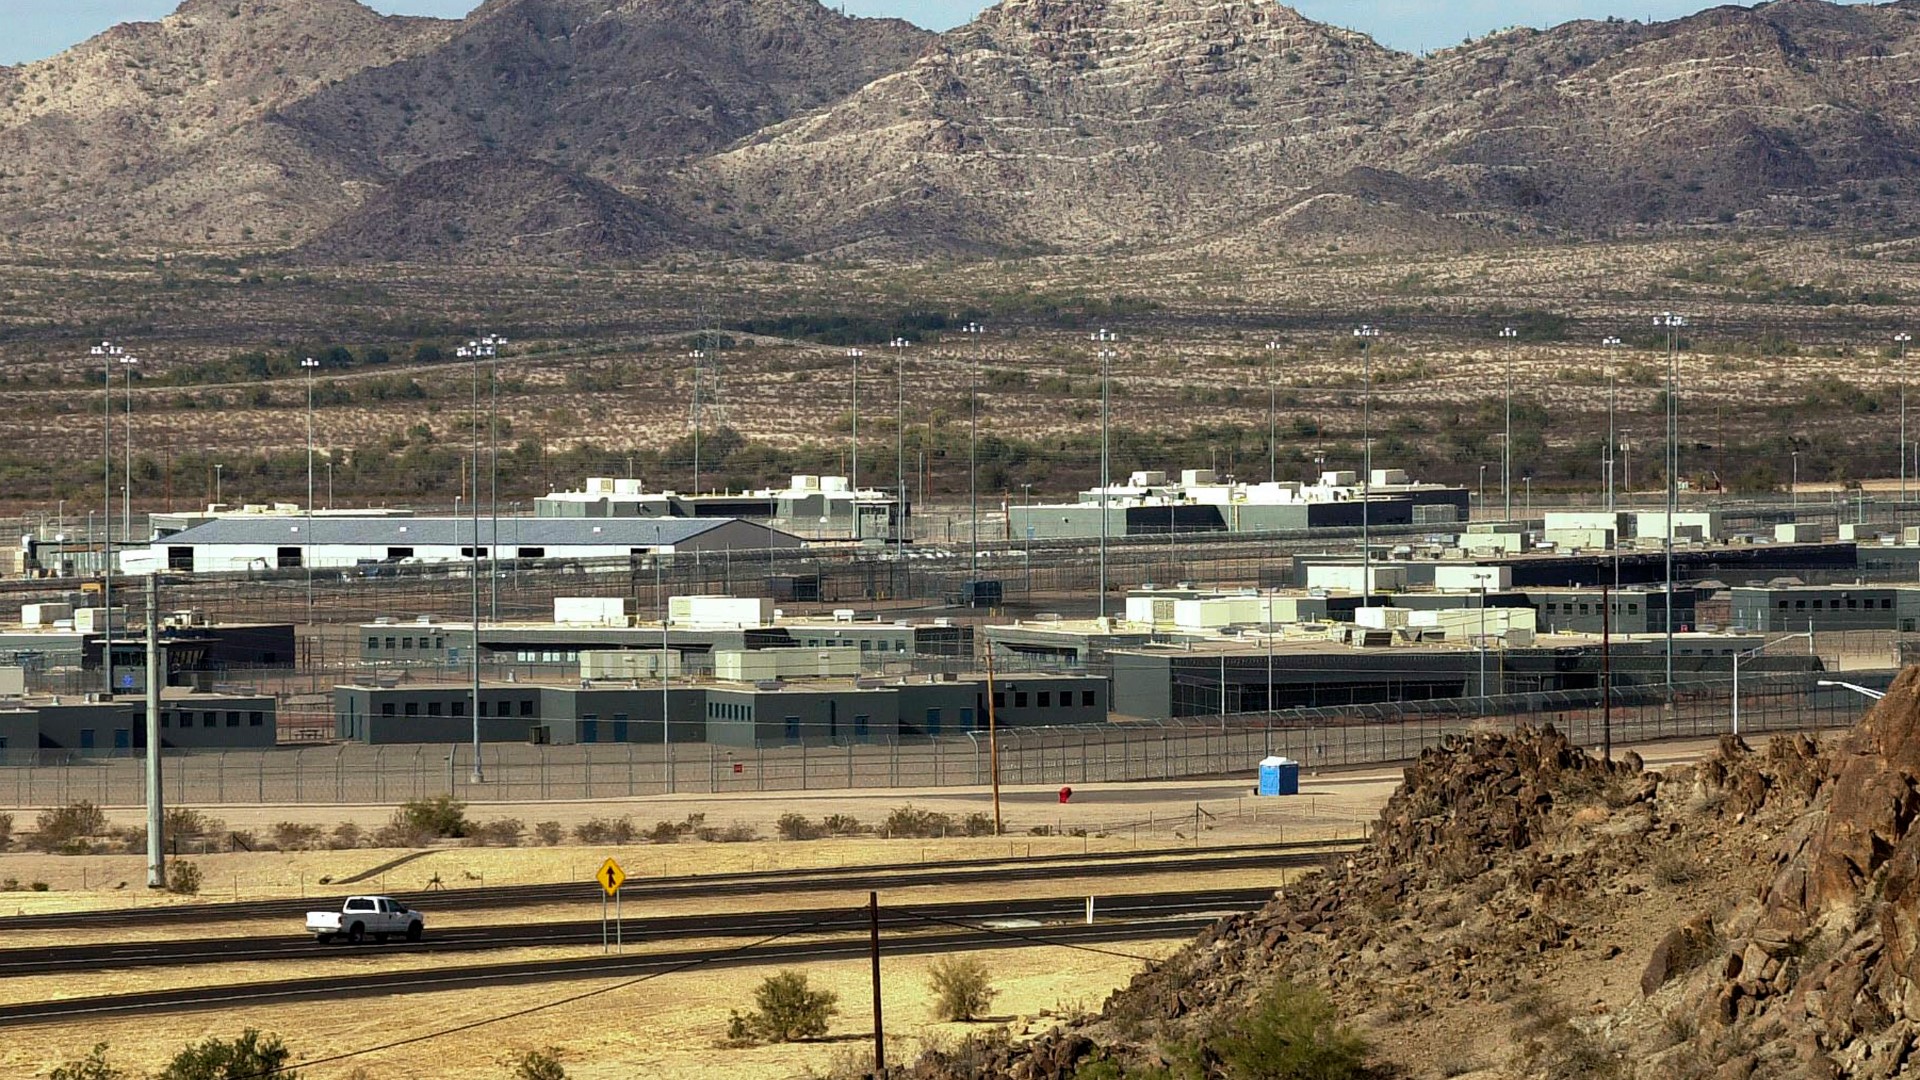 Judge Roslyn Silver outlined the changes she plans to impose on the Arizona Department of Corrections to remedy its constitutional violations of prisoners’ rights.